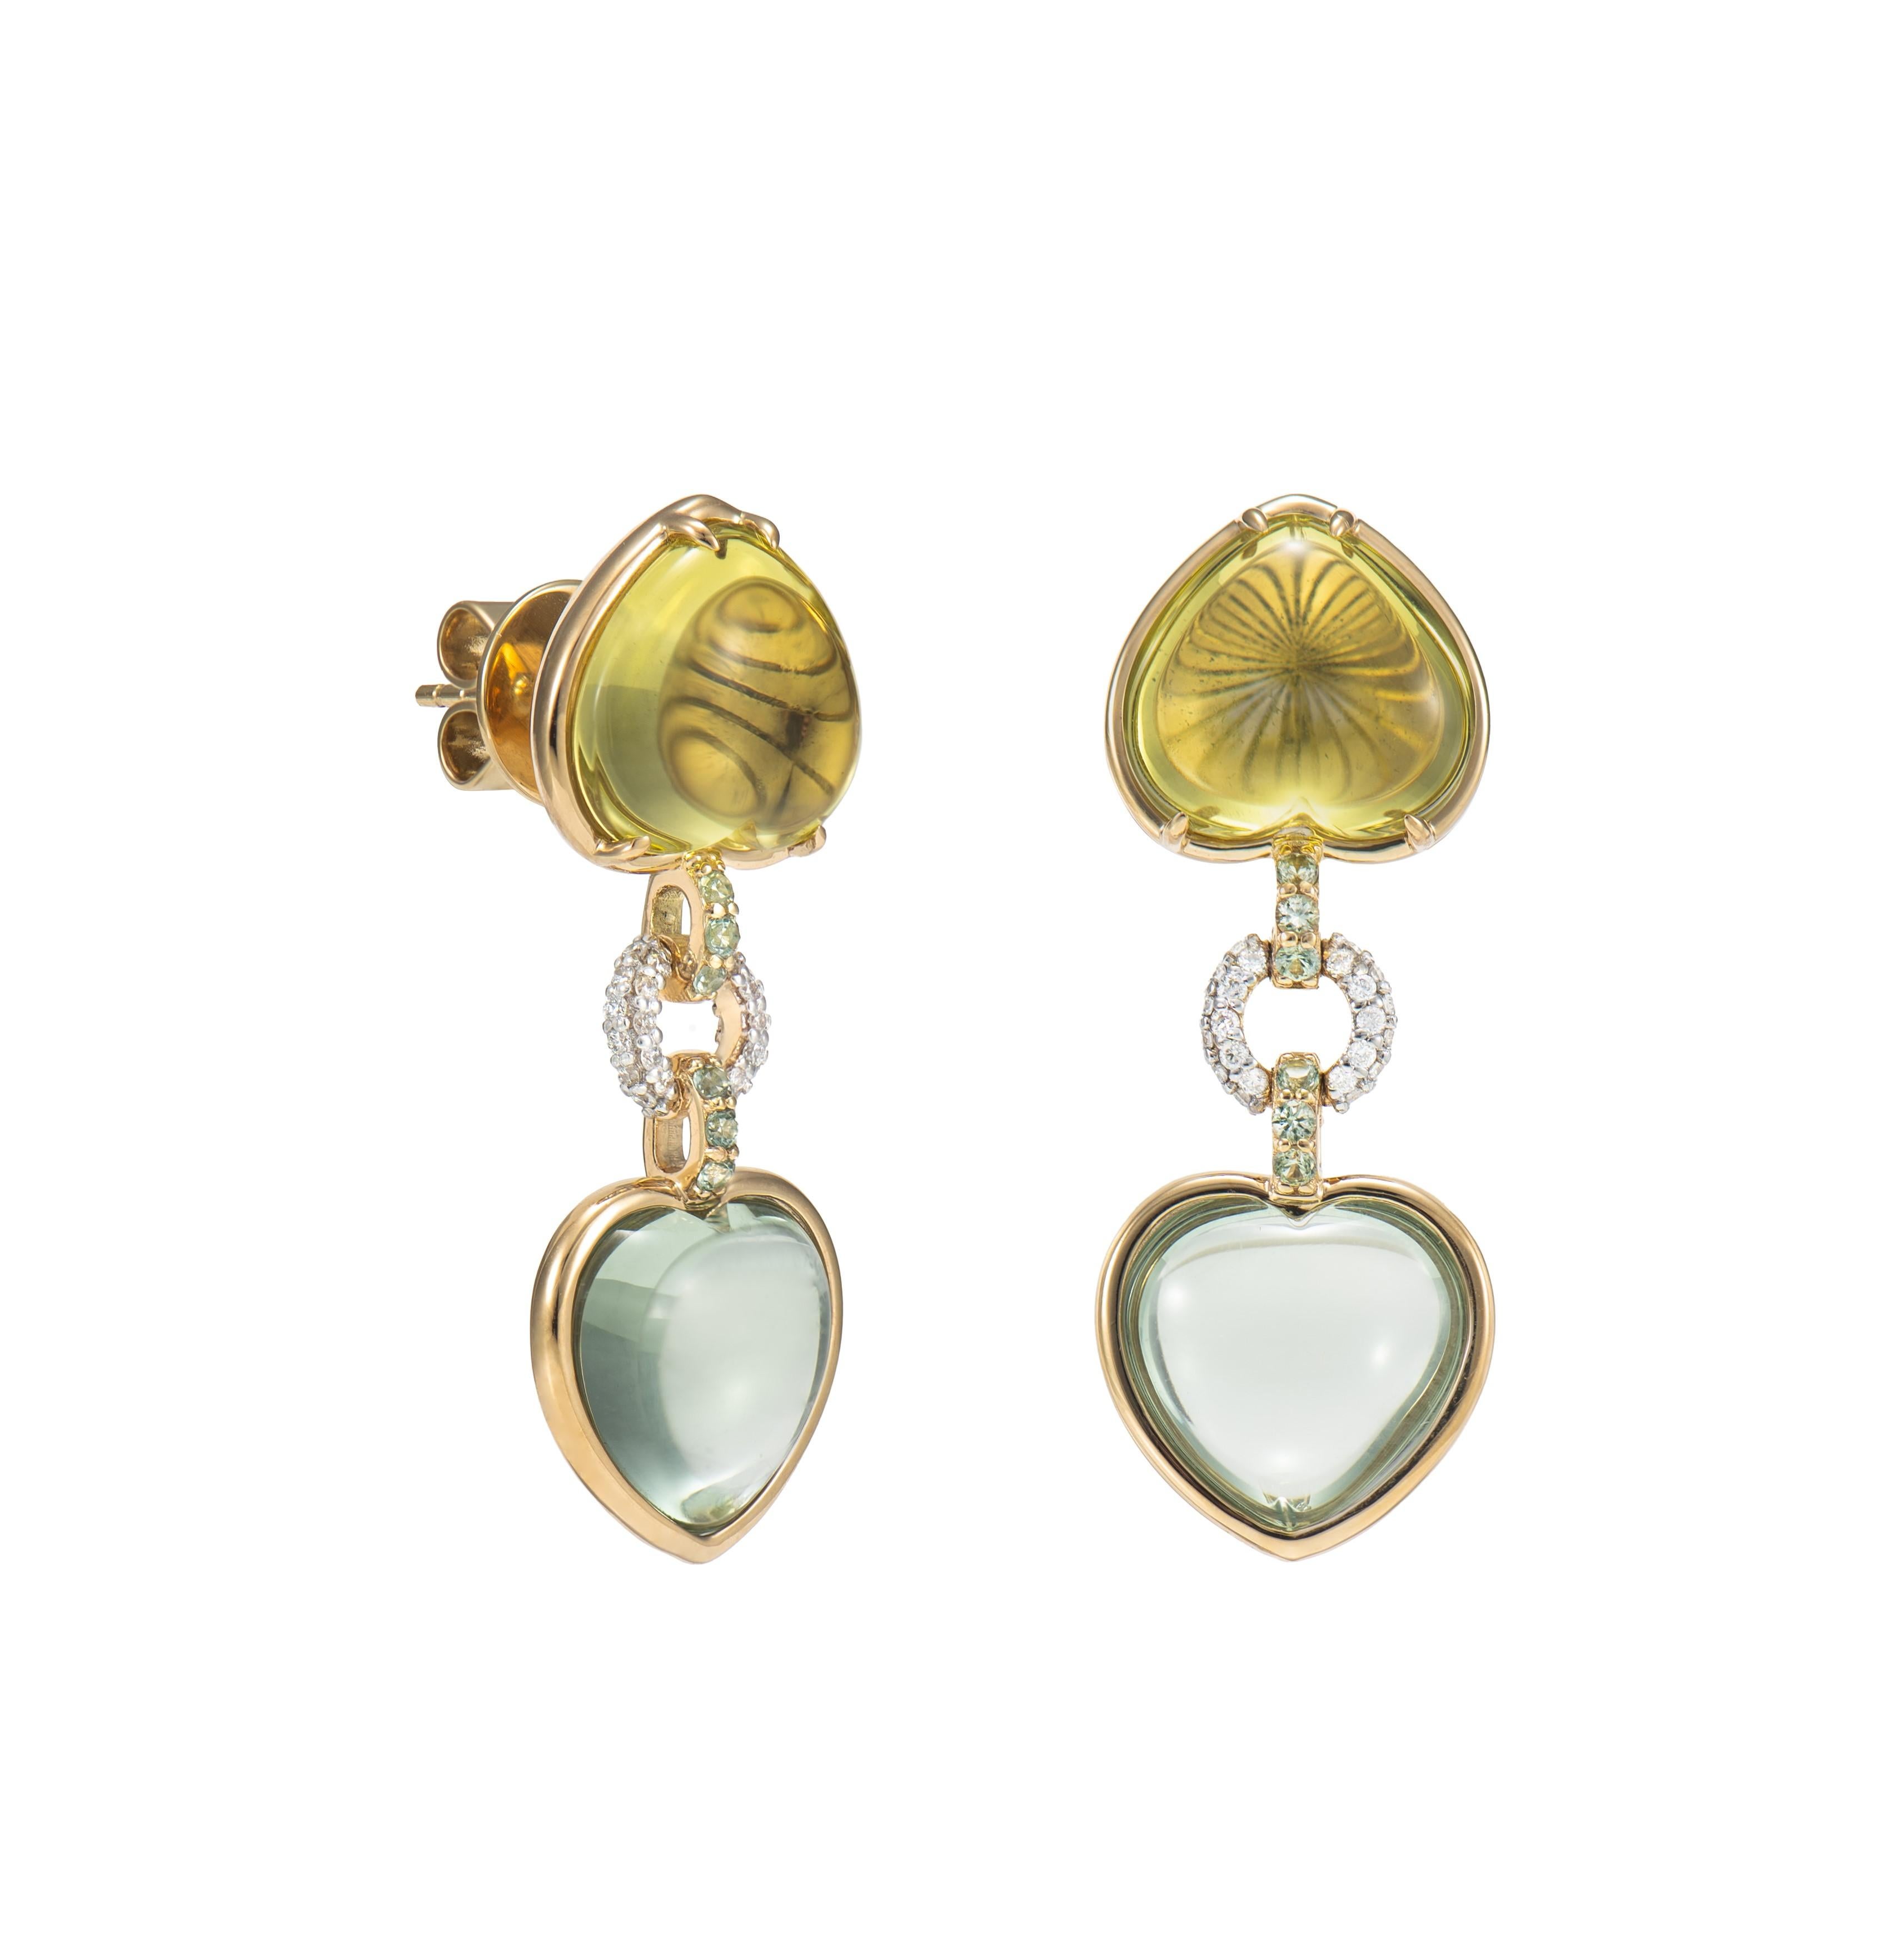 Celebrating the season of love with these delicate heart jewels! These pieces showcase beautiful gemstones with dainty accents to elevatue the beauty of the gem. 

Lemon Quartz and Green Amethyst Drop Earring in 18 Karat Yellow Gold with Green